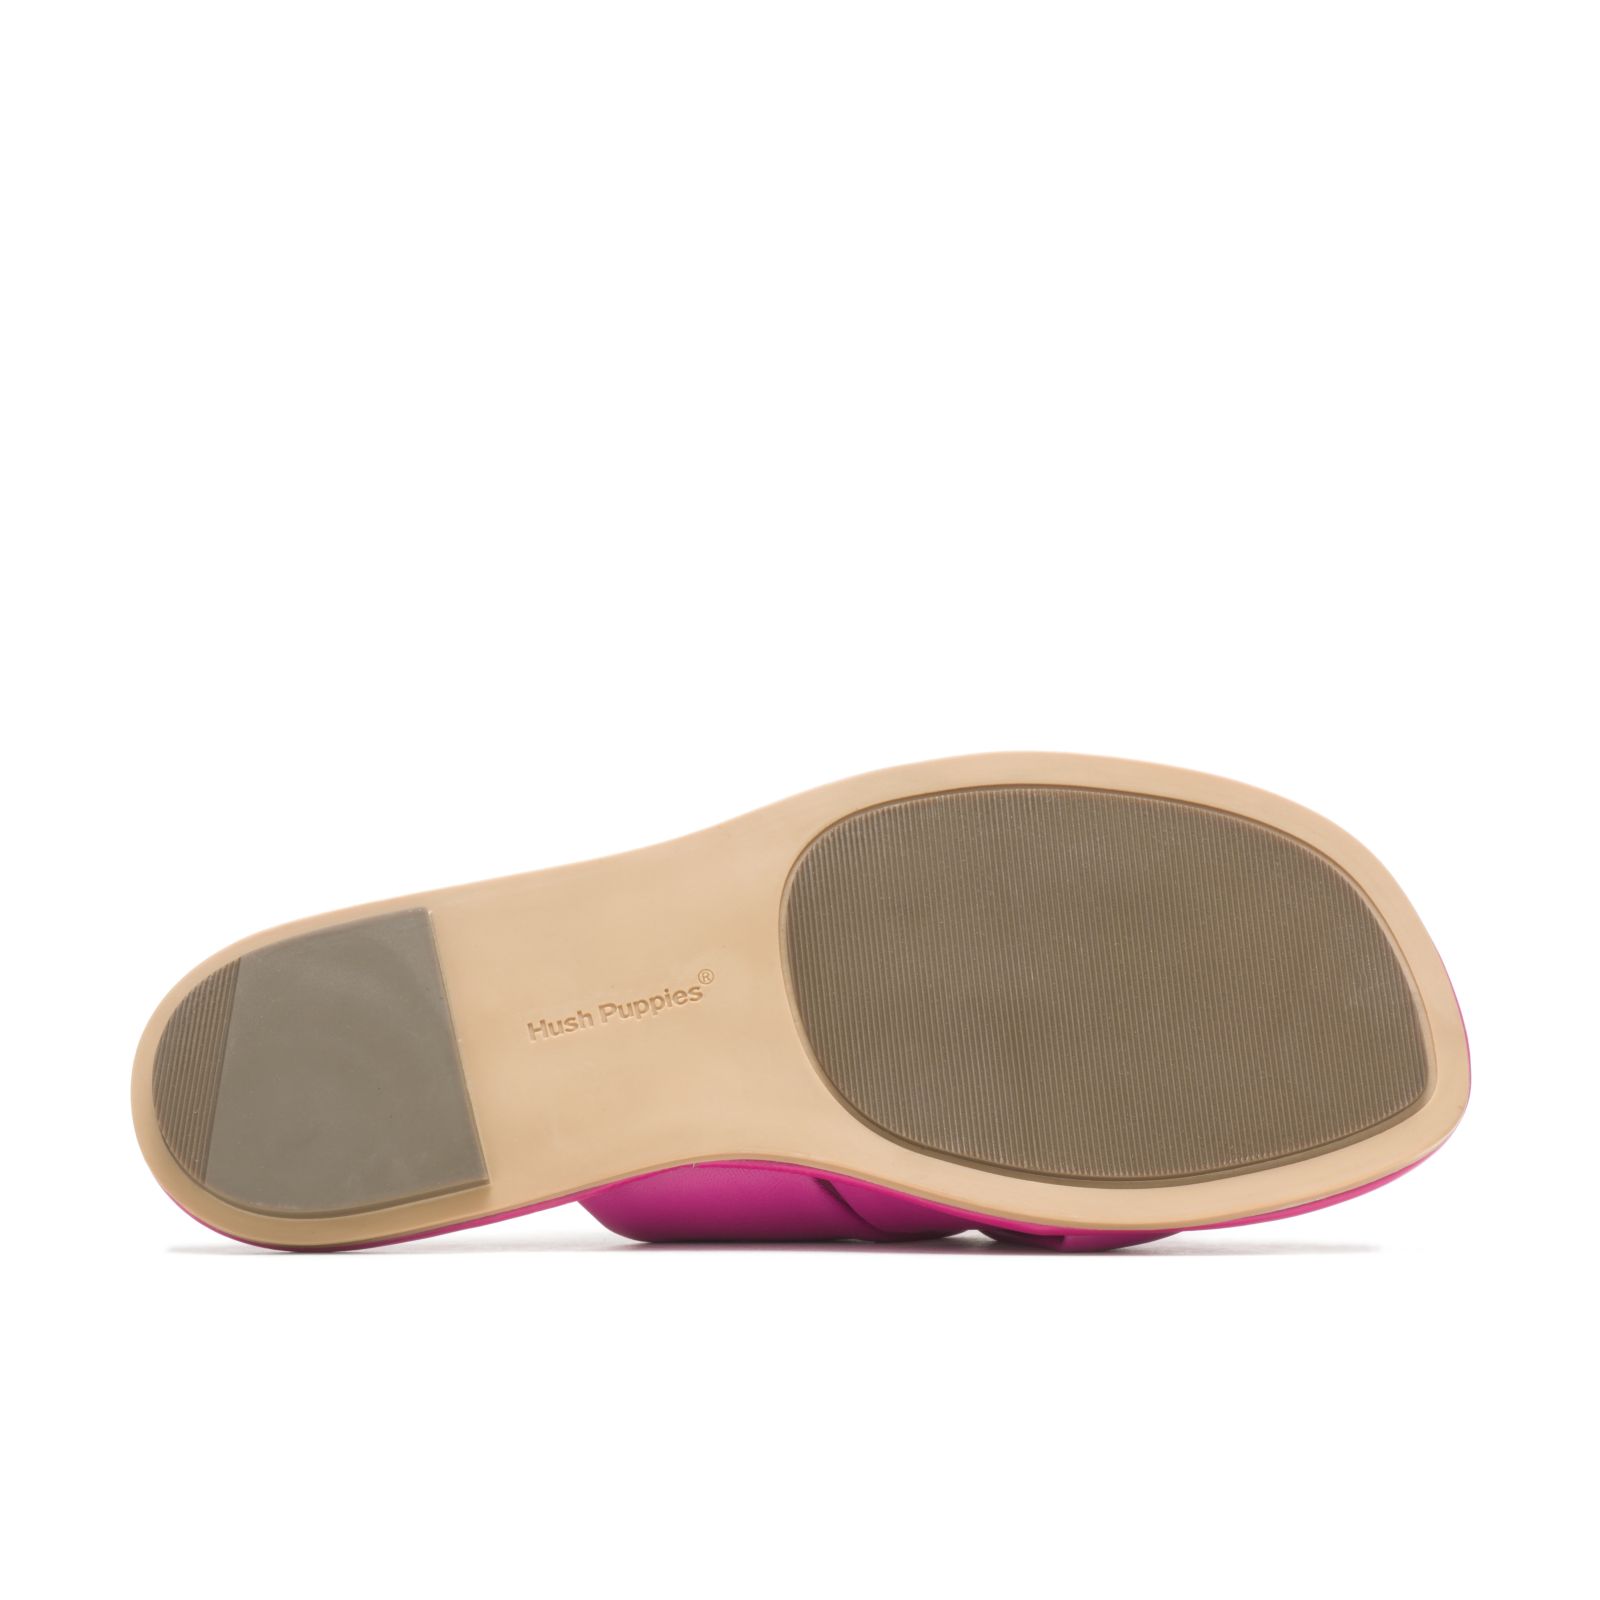 Sandalias Hush Puppies Emily Chanclas Mujer Very Berry Leather | QVWPSOT-90